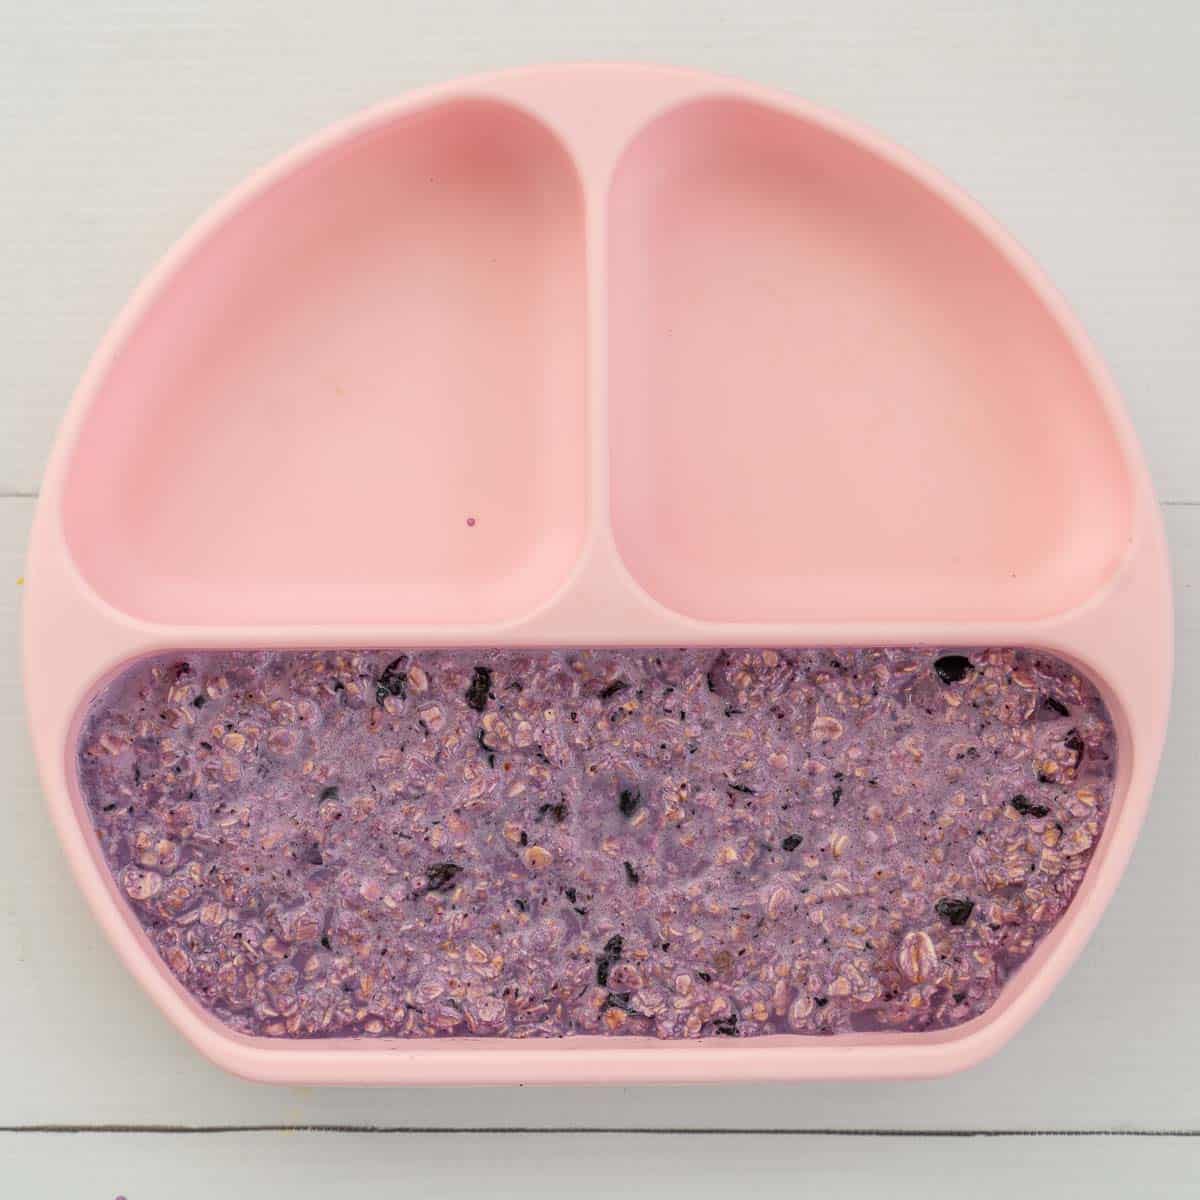 oatmeal coloured purple by blueberries in a divided baby plate